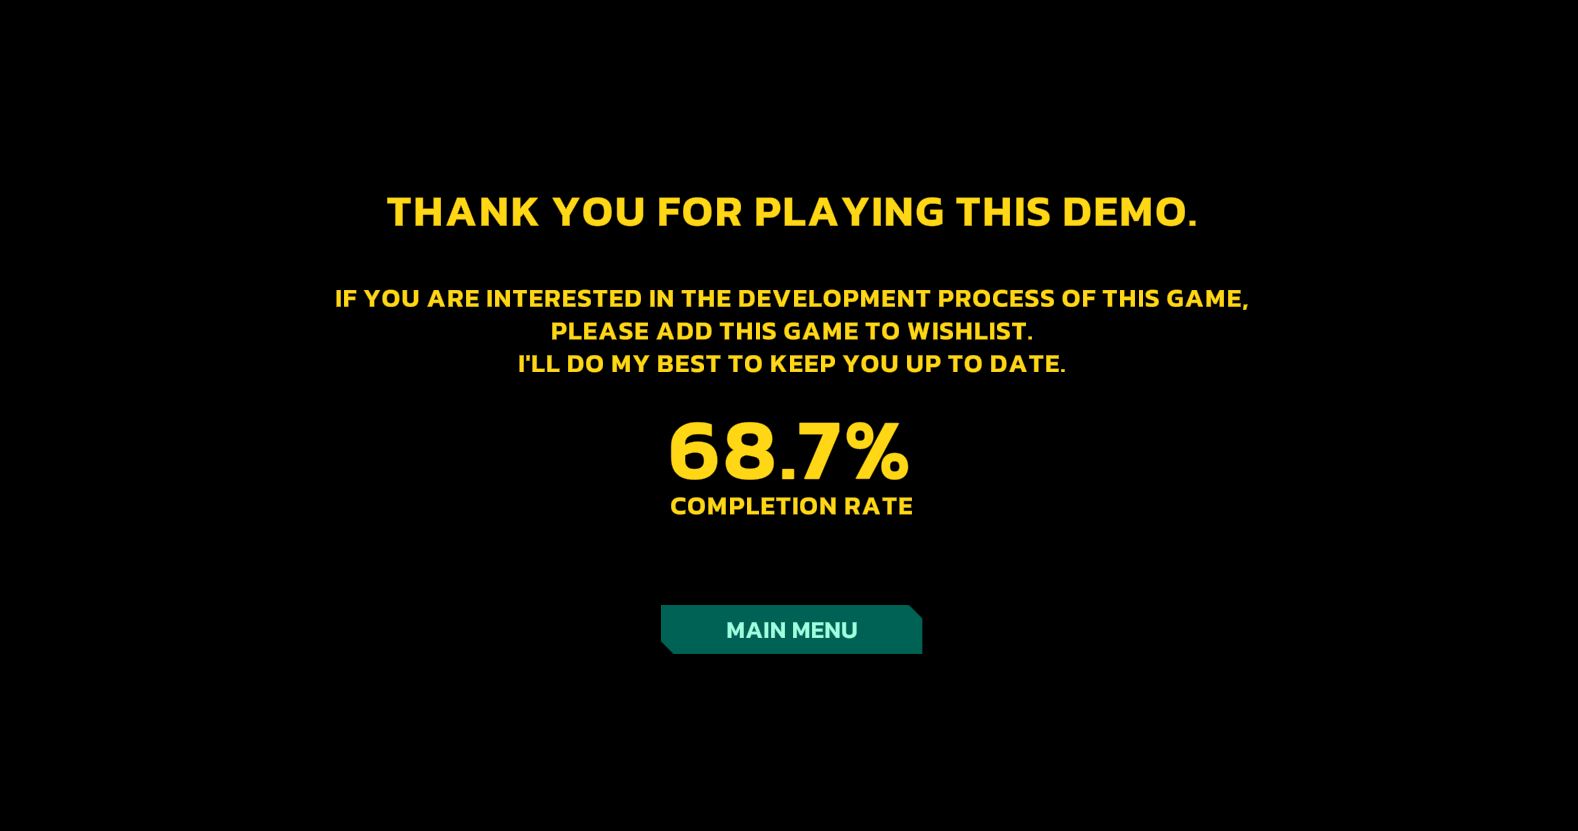 Added a completion rate at the end of the demo.